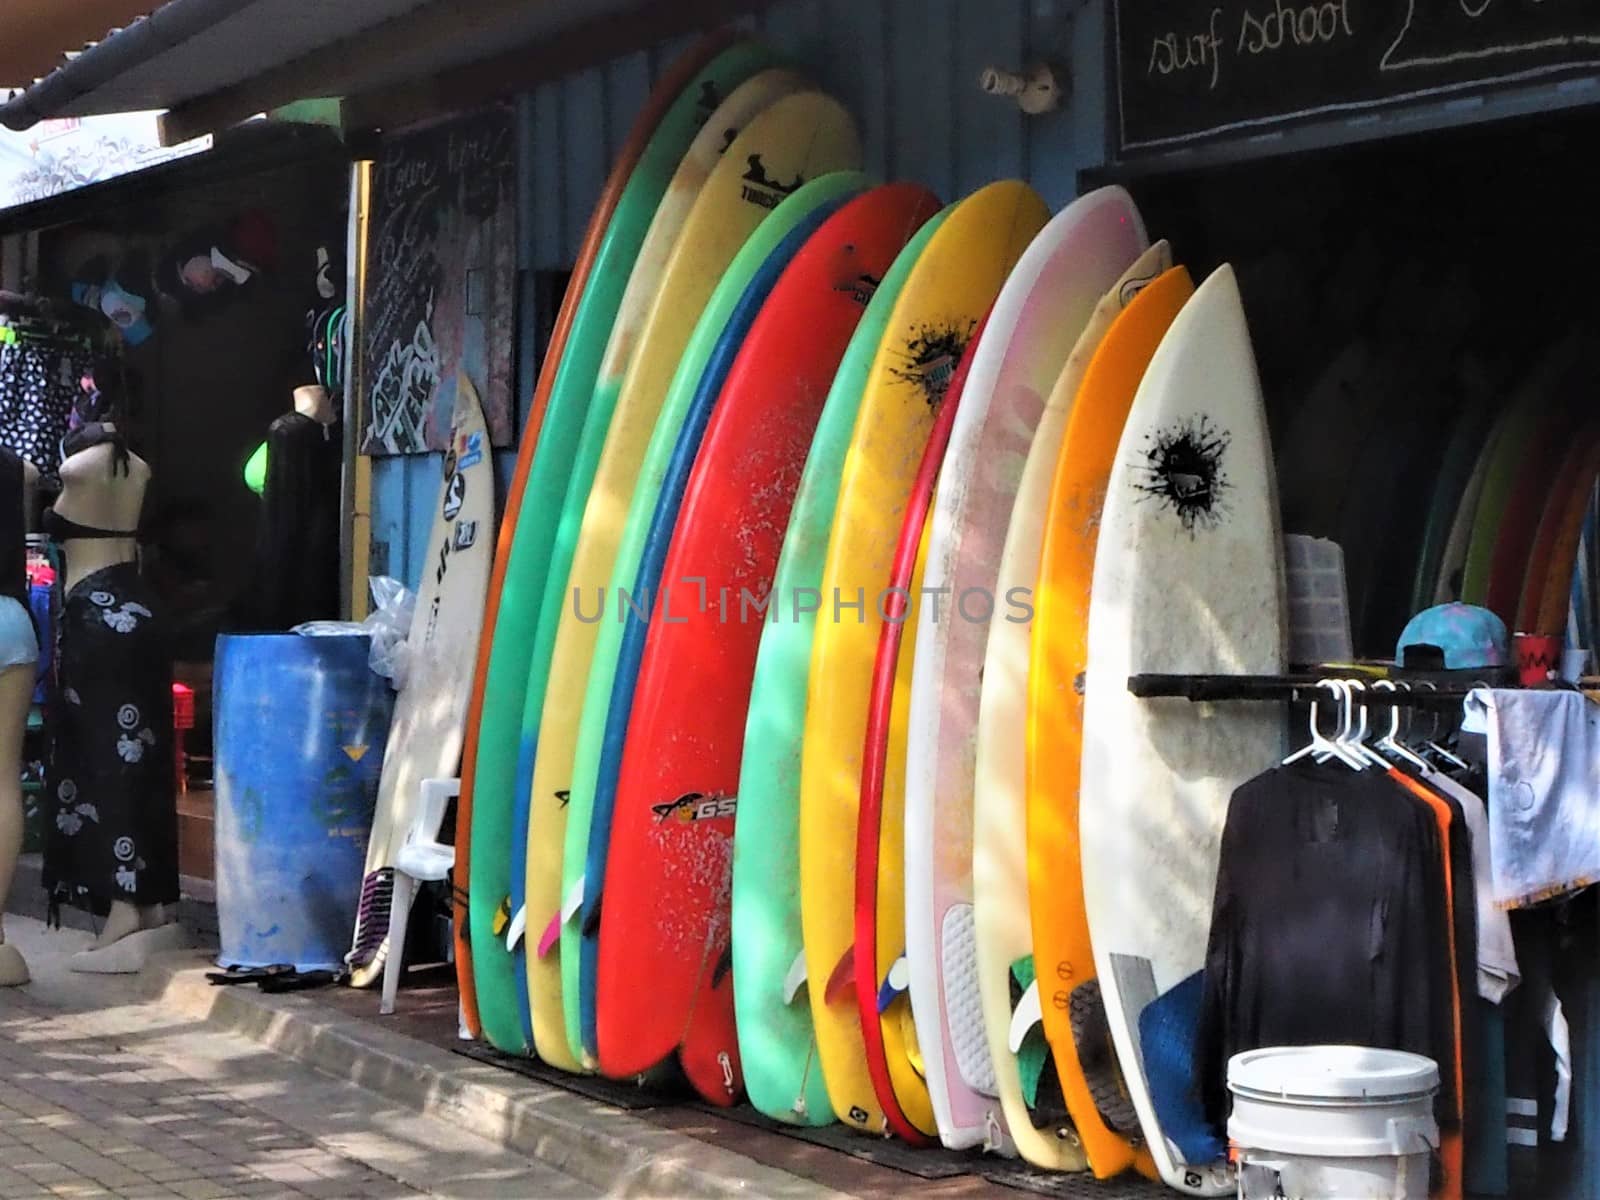 Surf boards stacked up outside the surf shack in el tunco in el salvador, central america